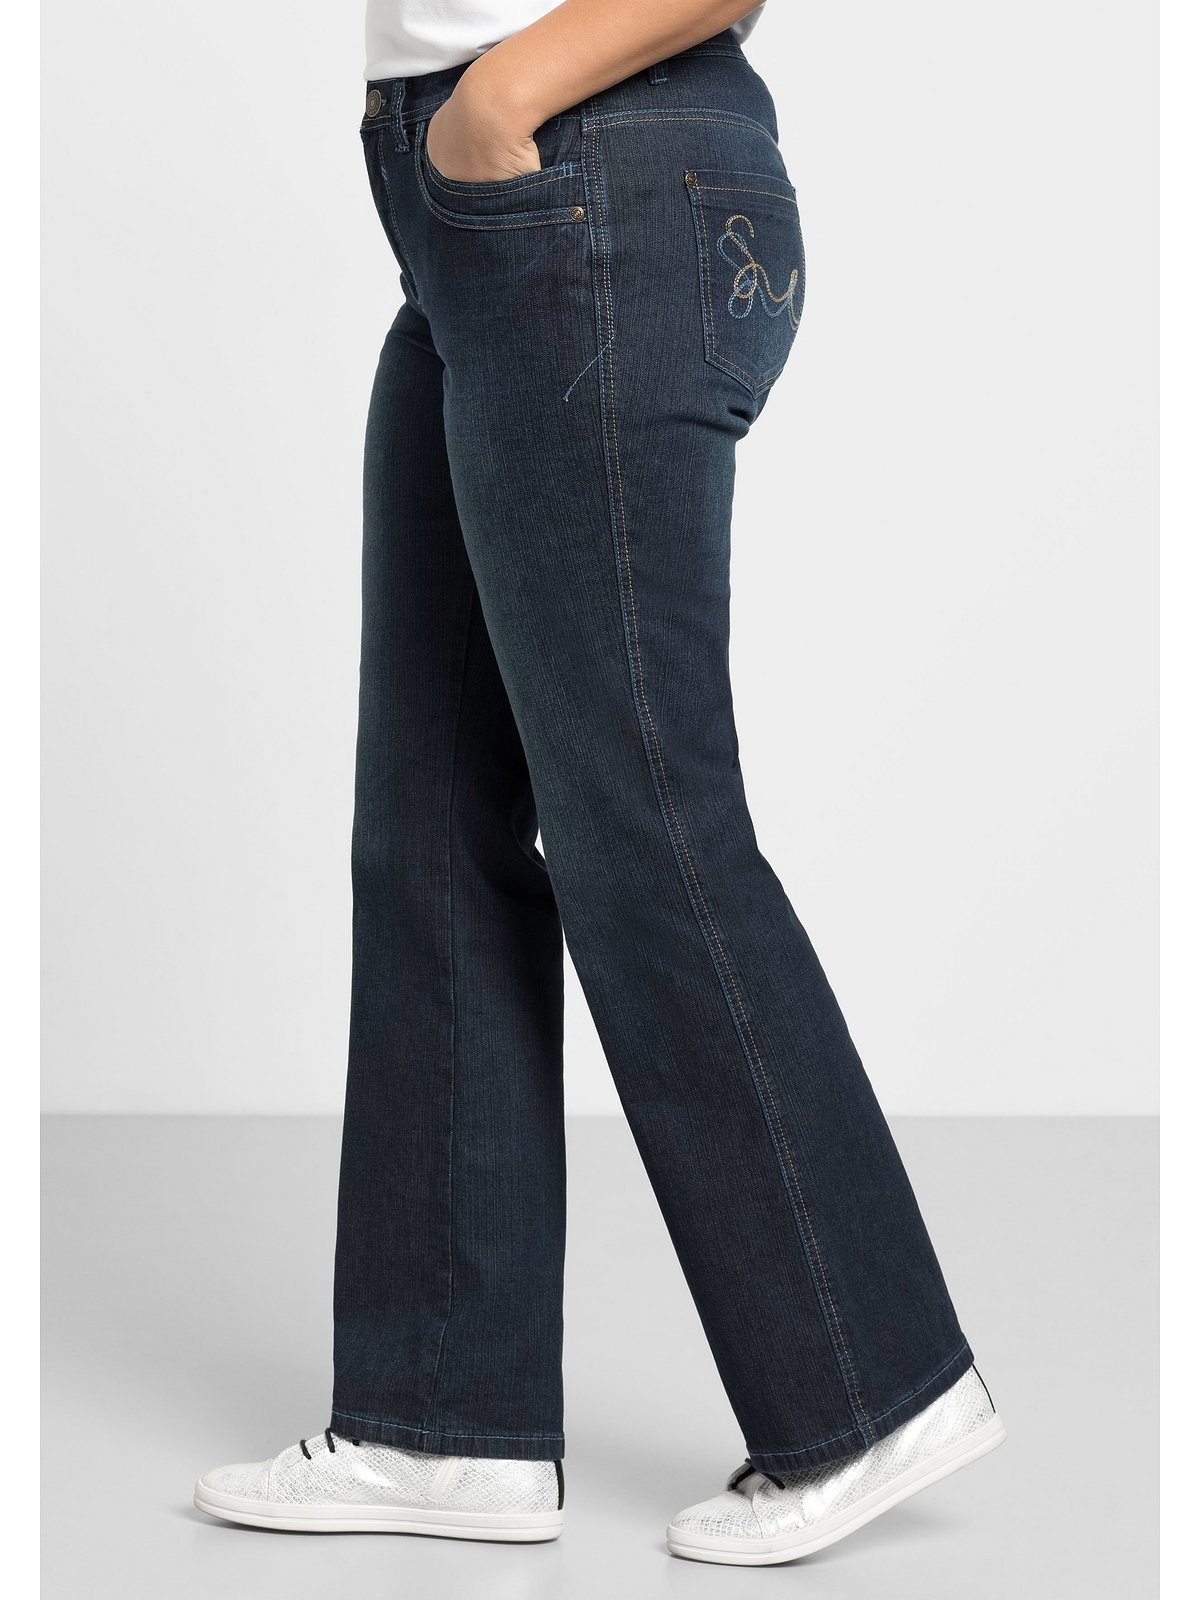 Sheego Stretch-Jeans Jeans MAILA in Bootcut-Form